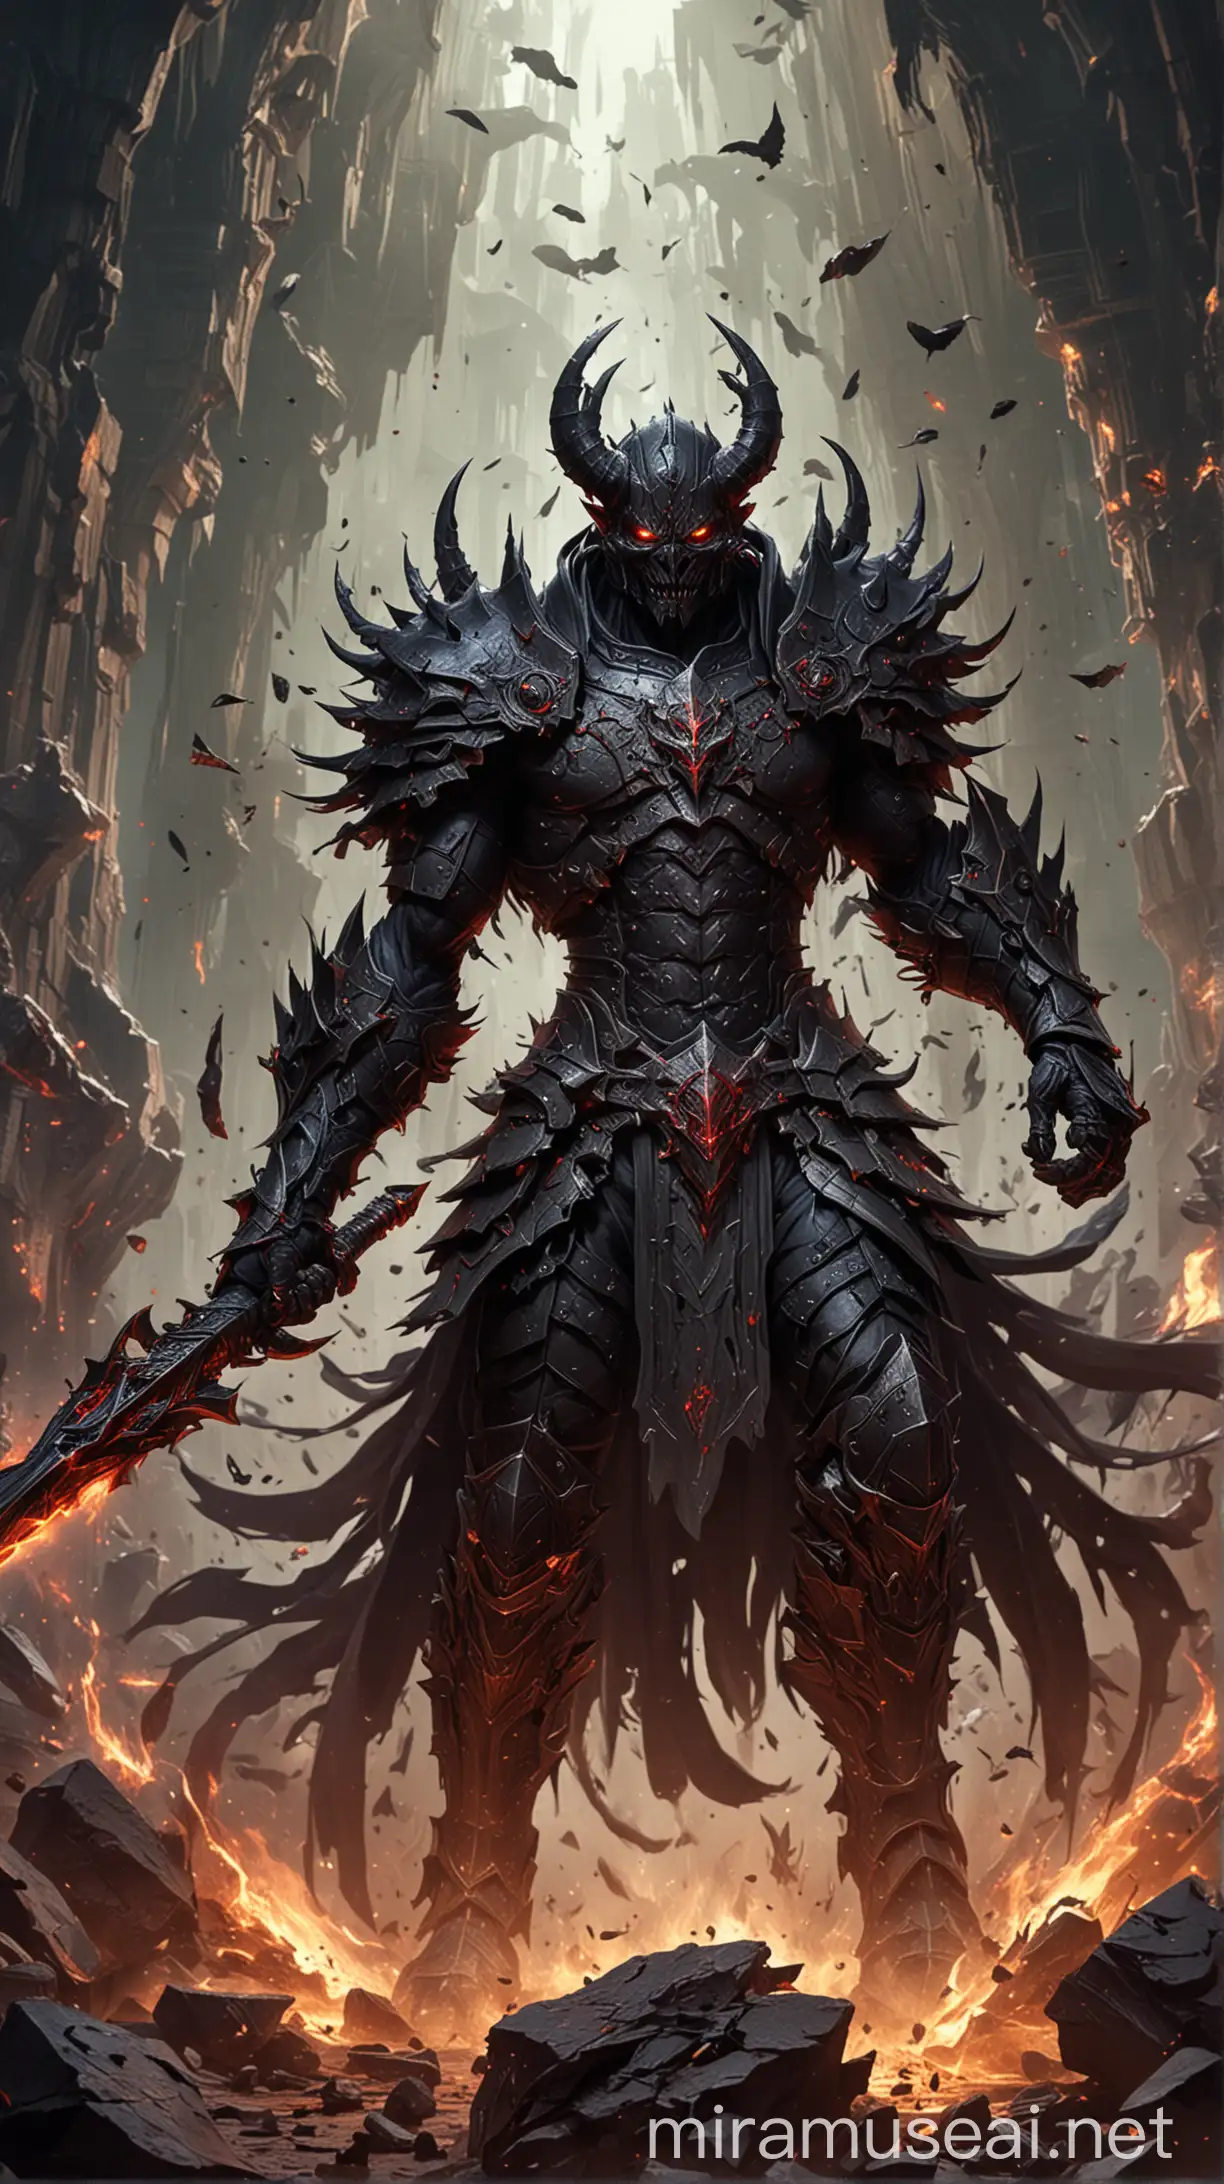 Daemon Prince:
Background: A swirling vortex of warp energy with jagged obsidian platforms and daemonic glyphs floating in the air.
Subject: A towering Daemon Prince, mutated and adorned with daemonic armor, wielding a massive weapon and radiating raw chaotic power.
Style: Dark and grotesque, showcasing the daemonic corruption and immense power of the Prince.
Text:
Title: Daemon Prince
Ability Text: Daemonic Aura: Inspire fear in enemy units and enhance daemonic minions' combat abilities in a duel, spreading terror and chaos. (Stat) Enemy Morale -1 (High Roll), Daemonic Units Attack +2 (High Roll)